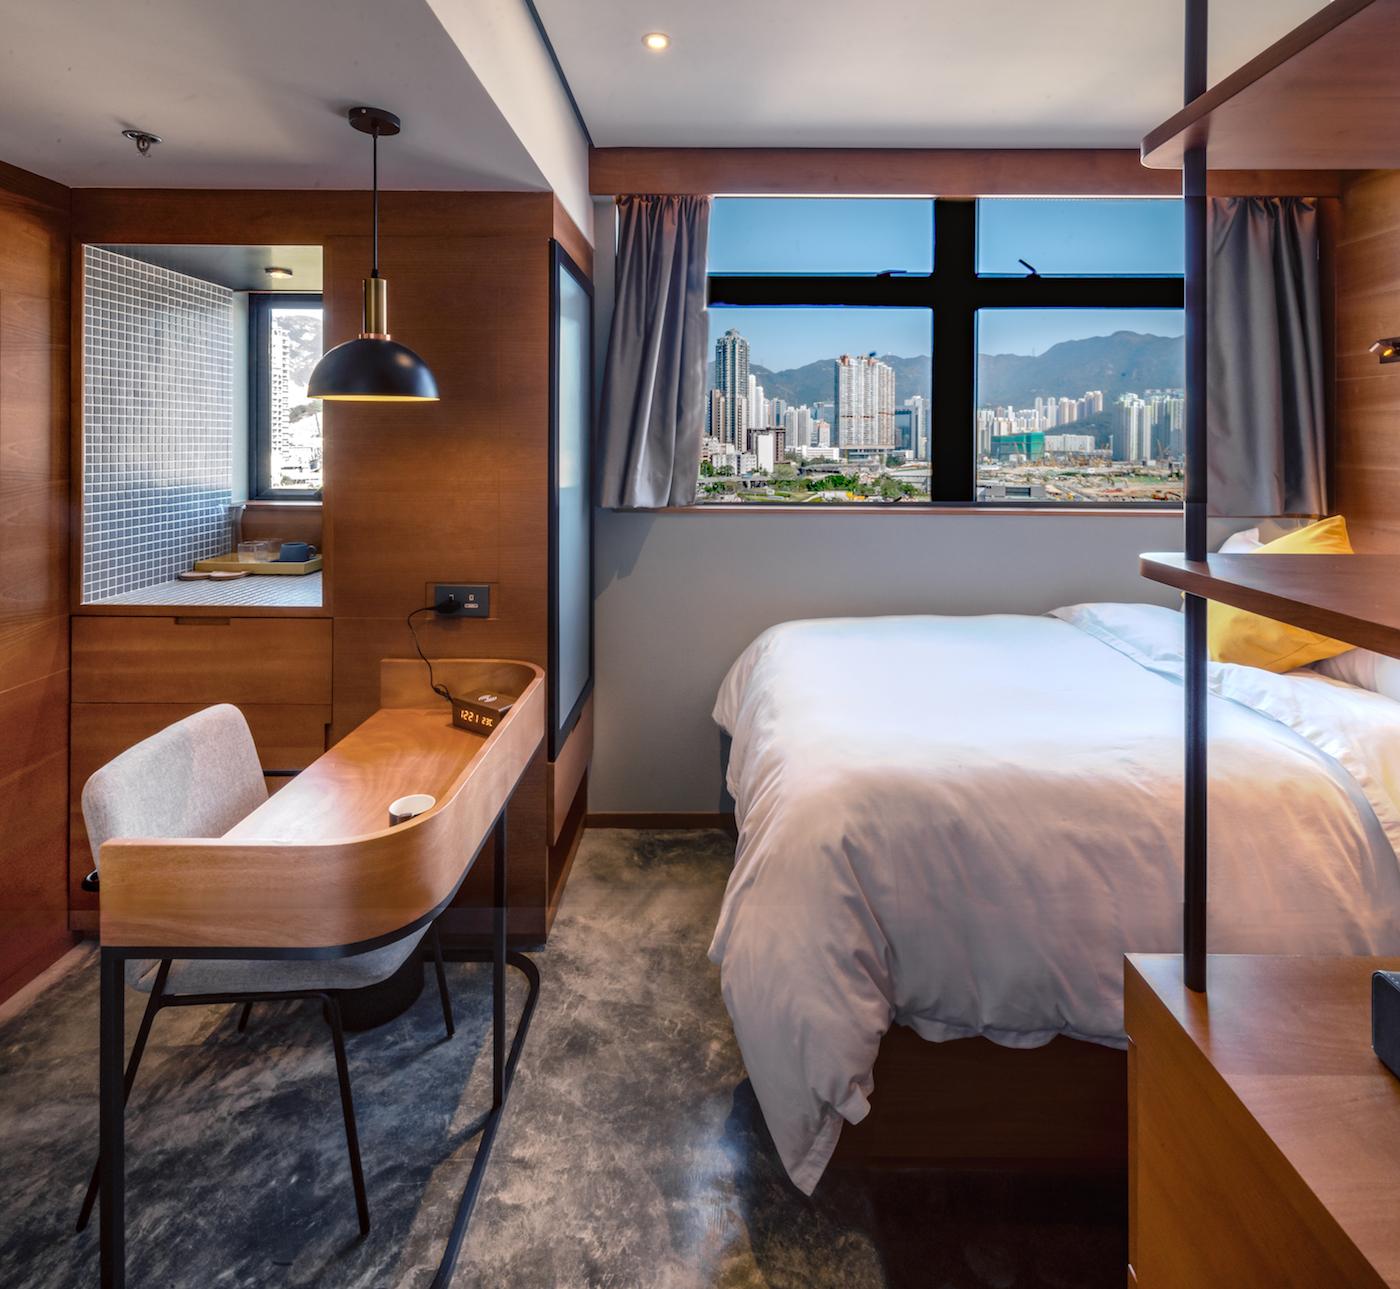 3 Of The Coolest Co-Living Spaces You Can Find in Hong Kong